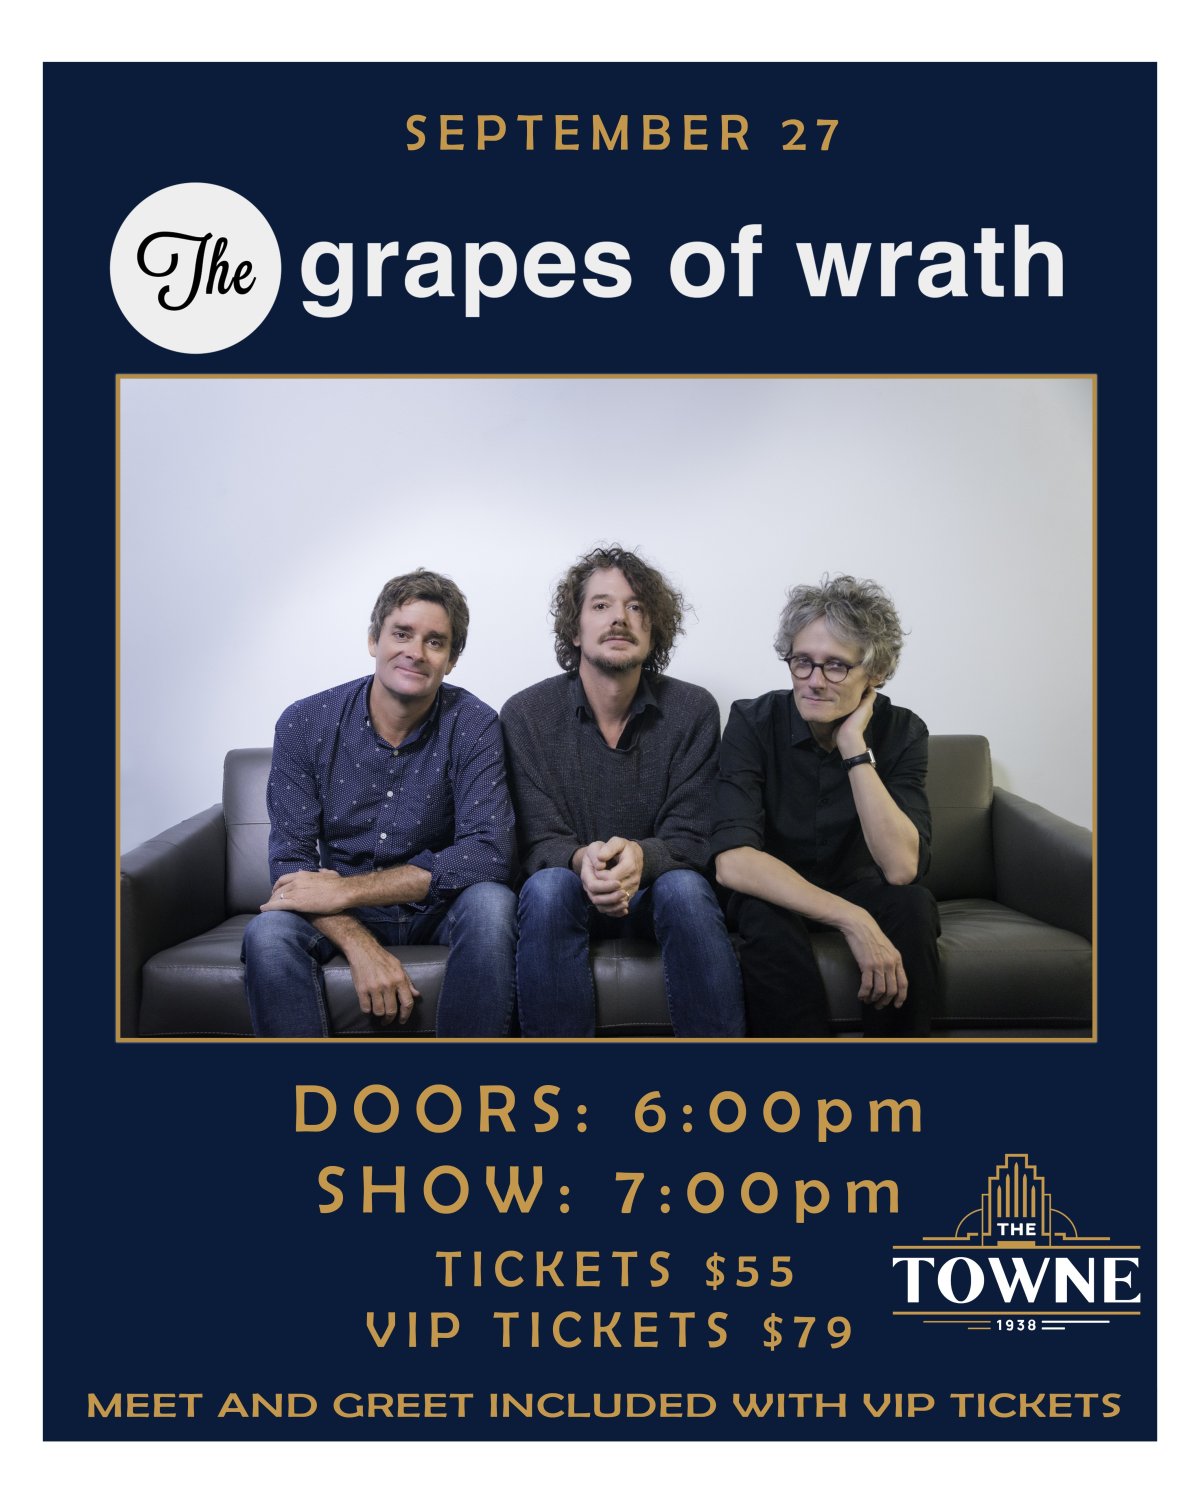 The Grapes of Wrath: Live at The Towne in Vernon - image